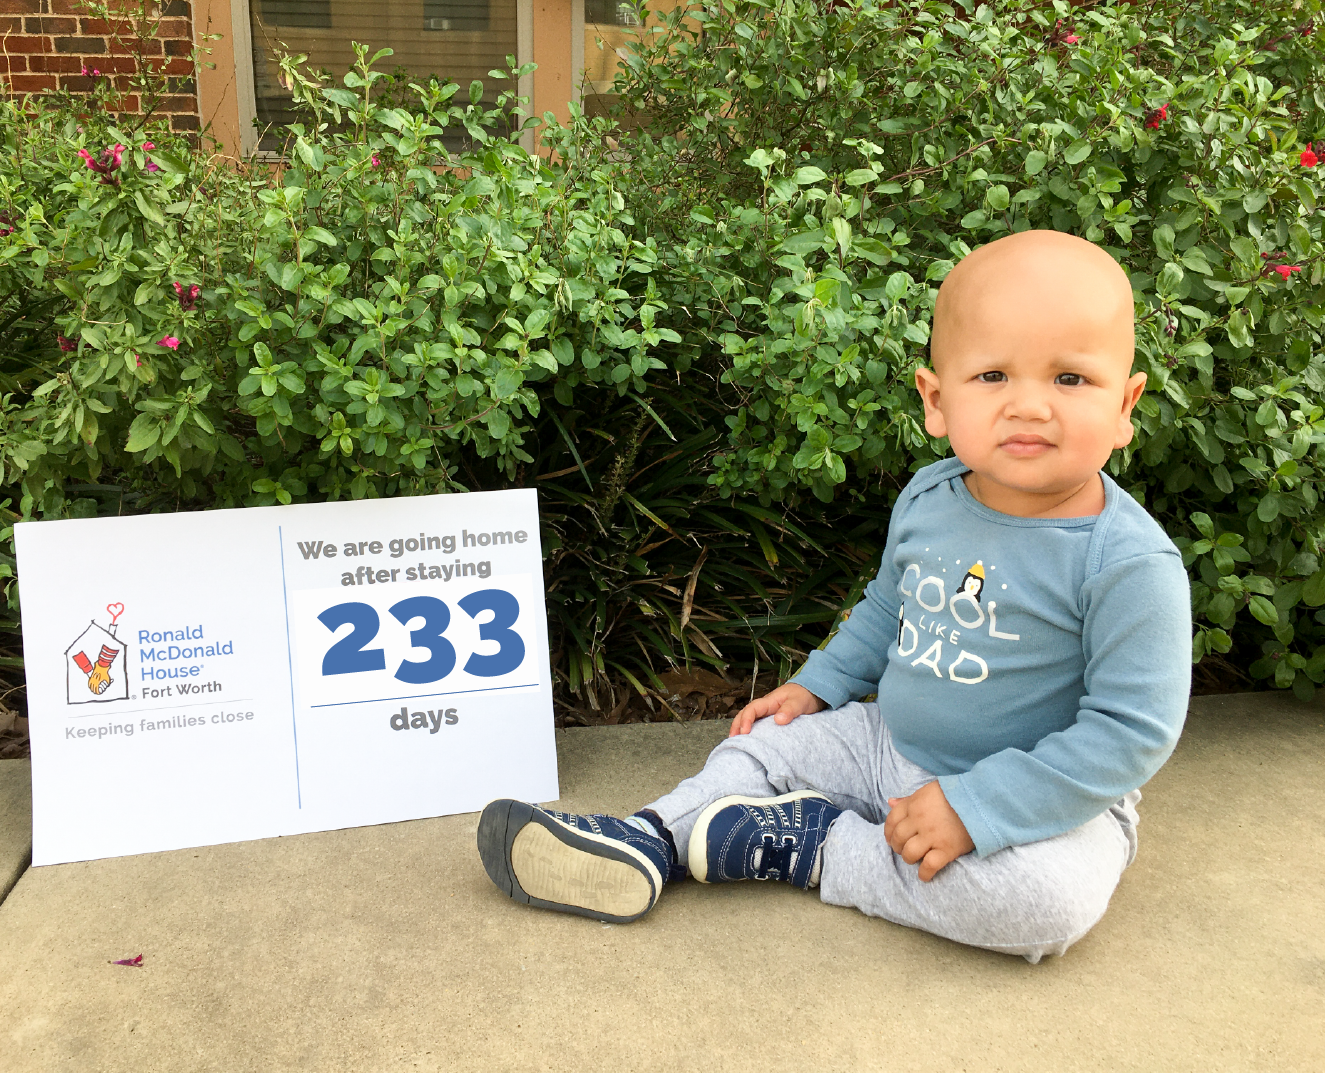 Baby sitting next to a sign that says they are going home after 233 days of staying at RMHFW